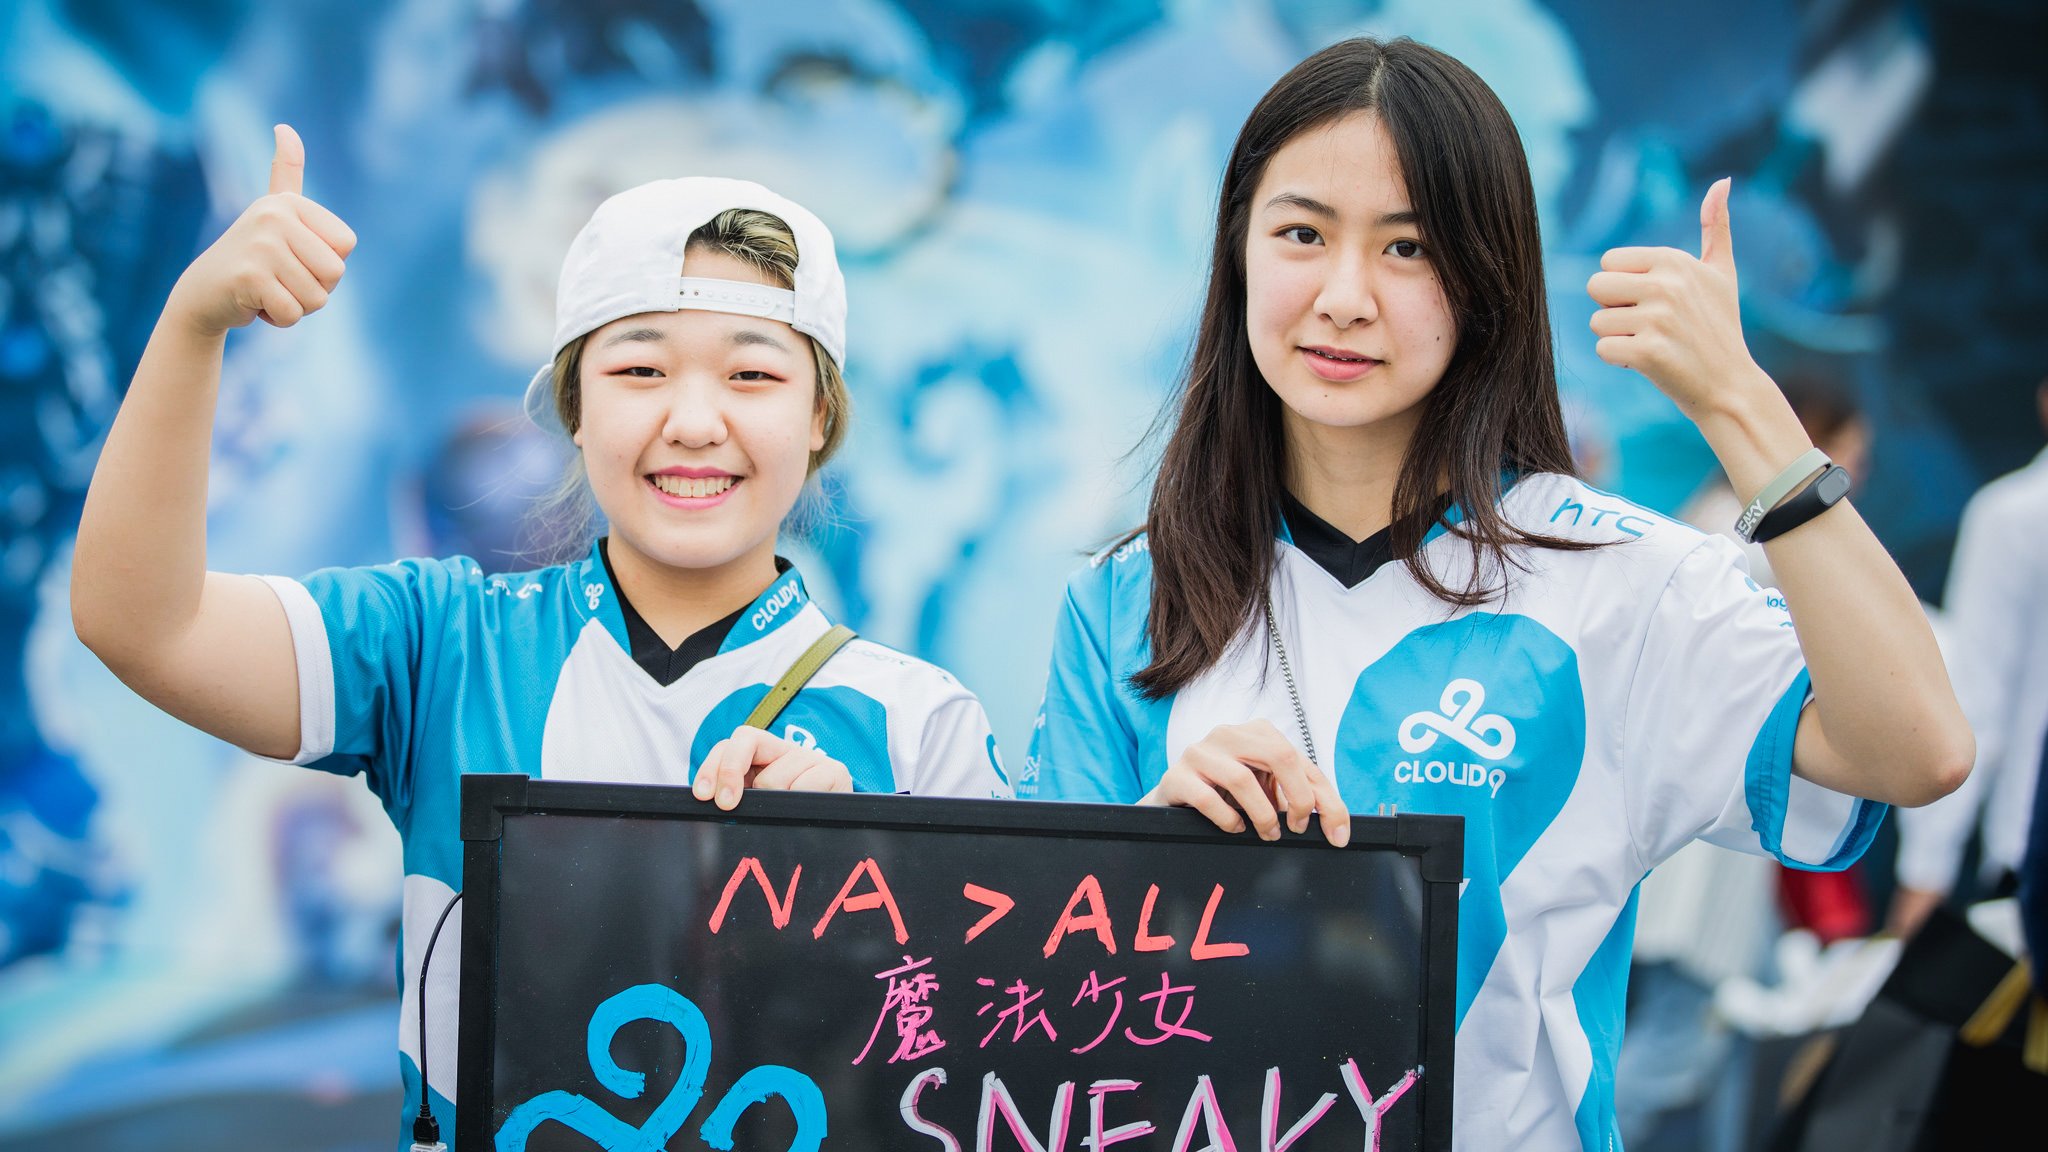 Cloud9 beat CLG in rematch of the NA LCS regional qualifying final